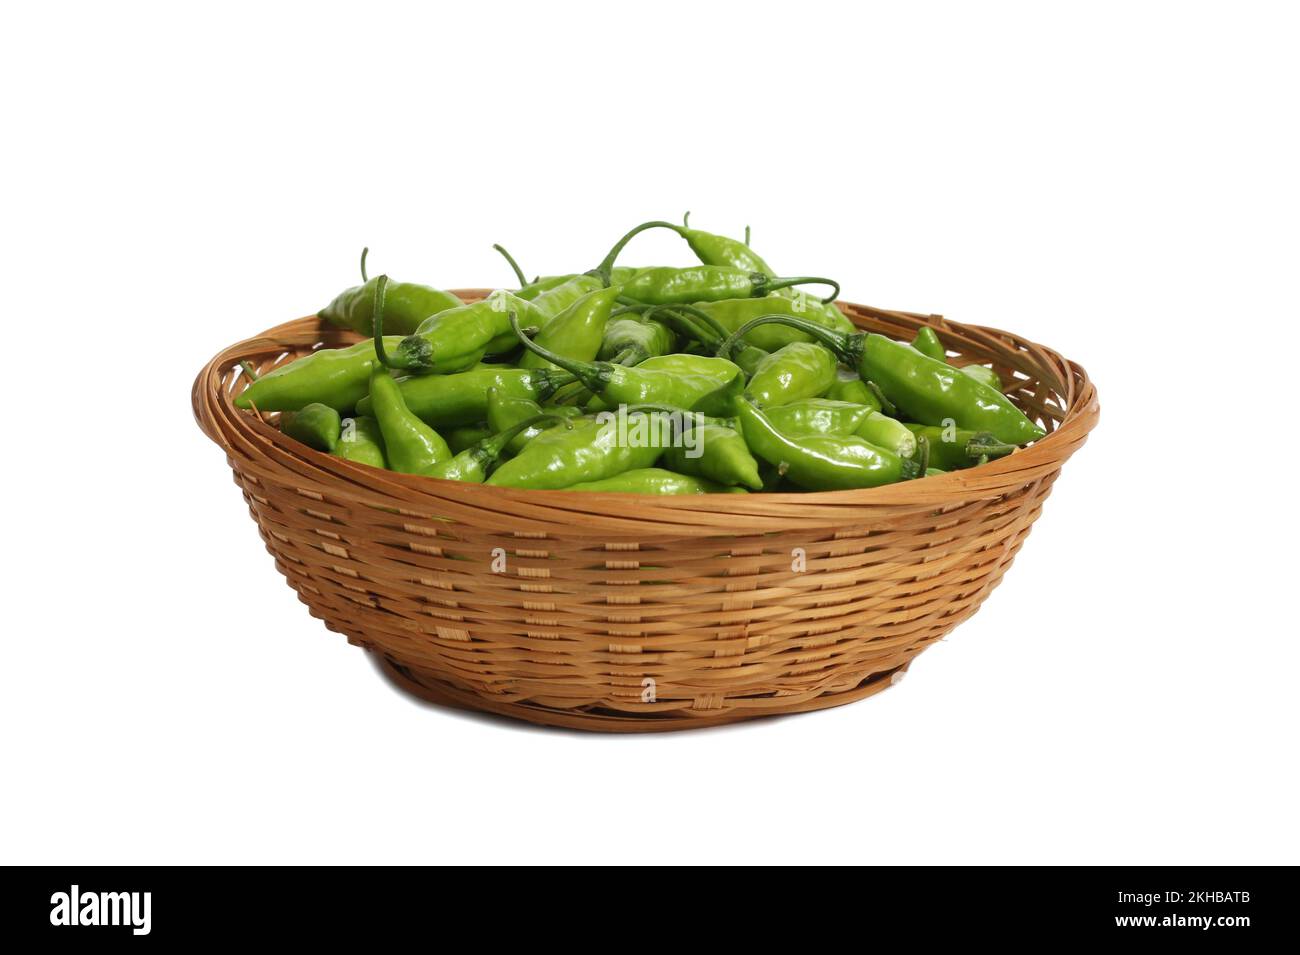 Bowl of Fresh Aji Limo Chili Peppers Isolated on White Stock Photo